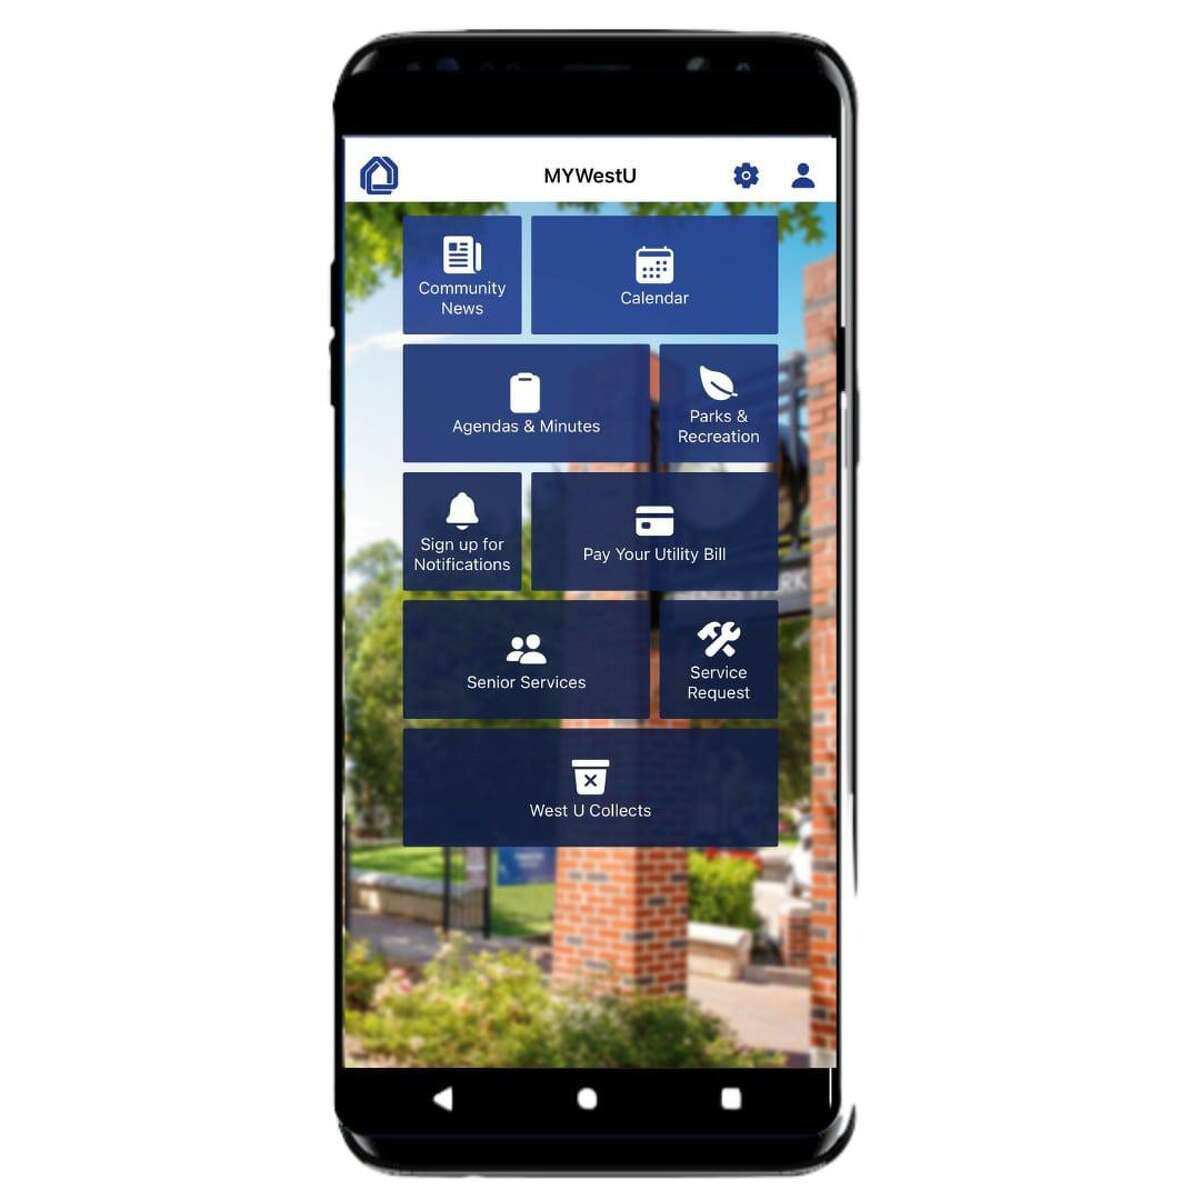 The MyWestU App was recently released in order to make city services more accessible to West University Place residents.